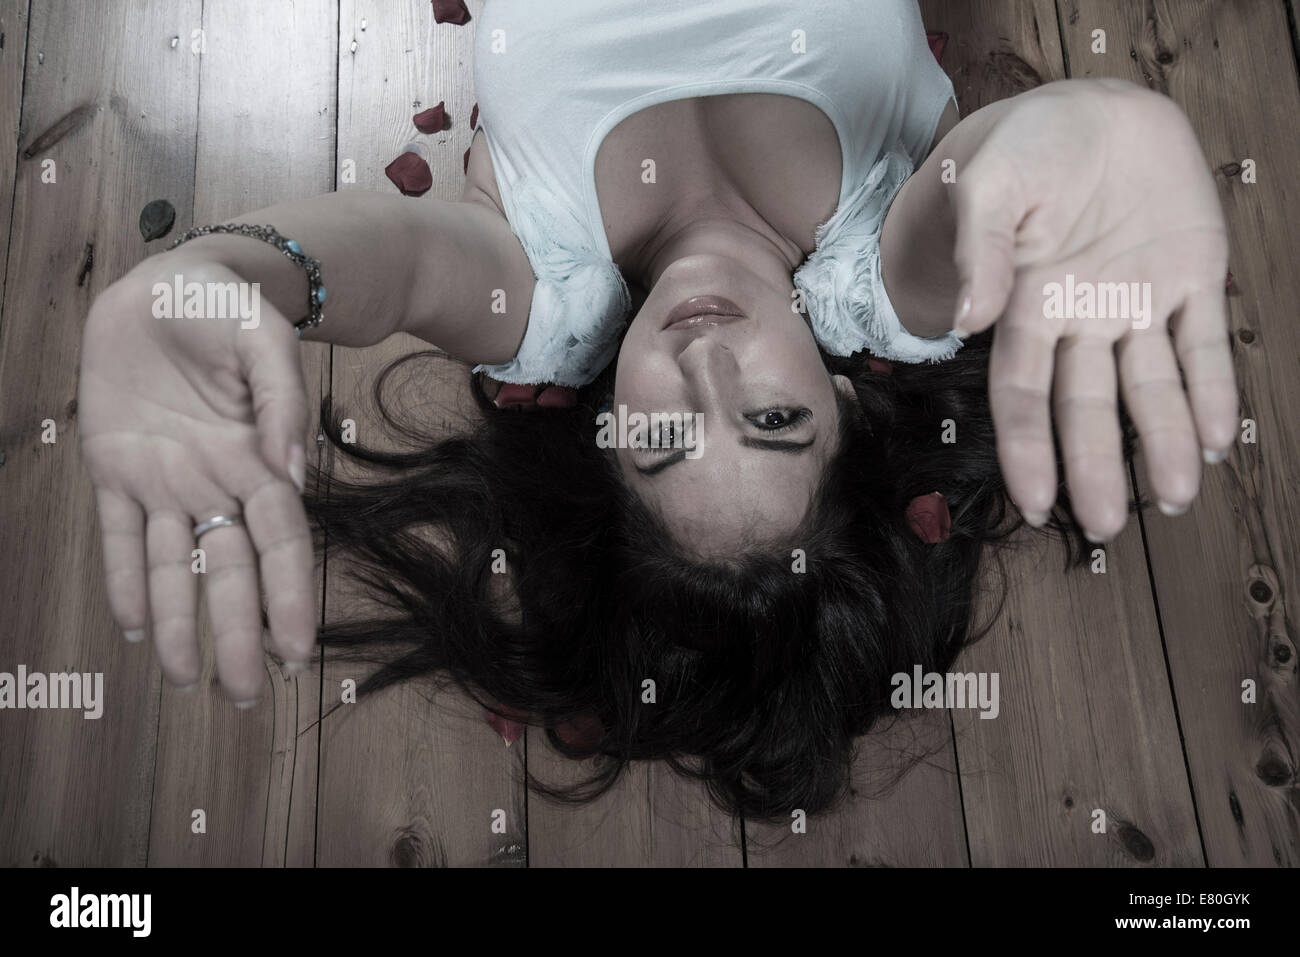 Woman lying on floorboards with her hands raised Stock Photo